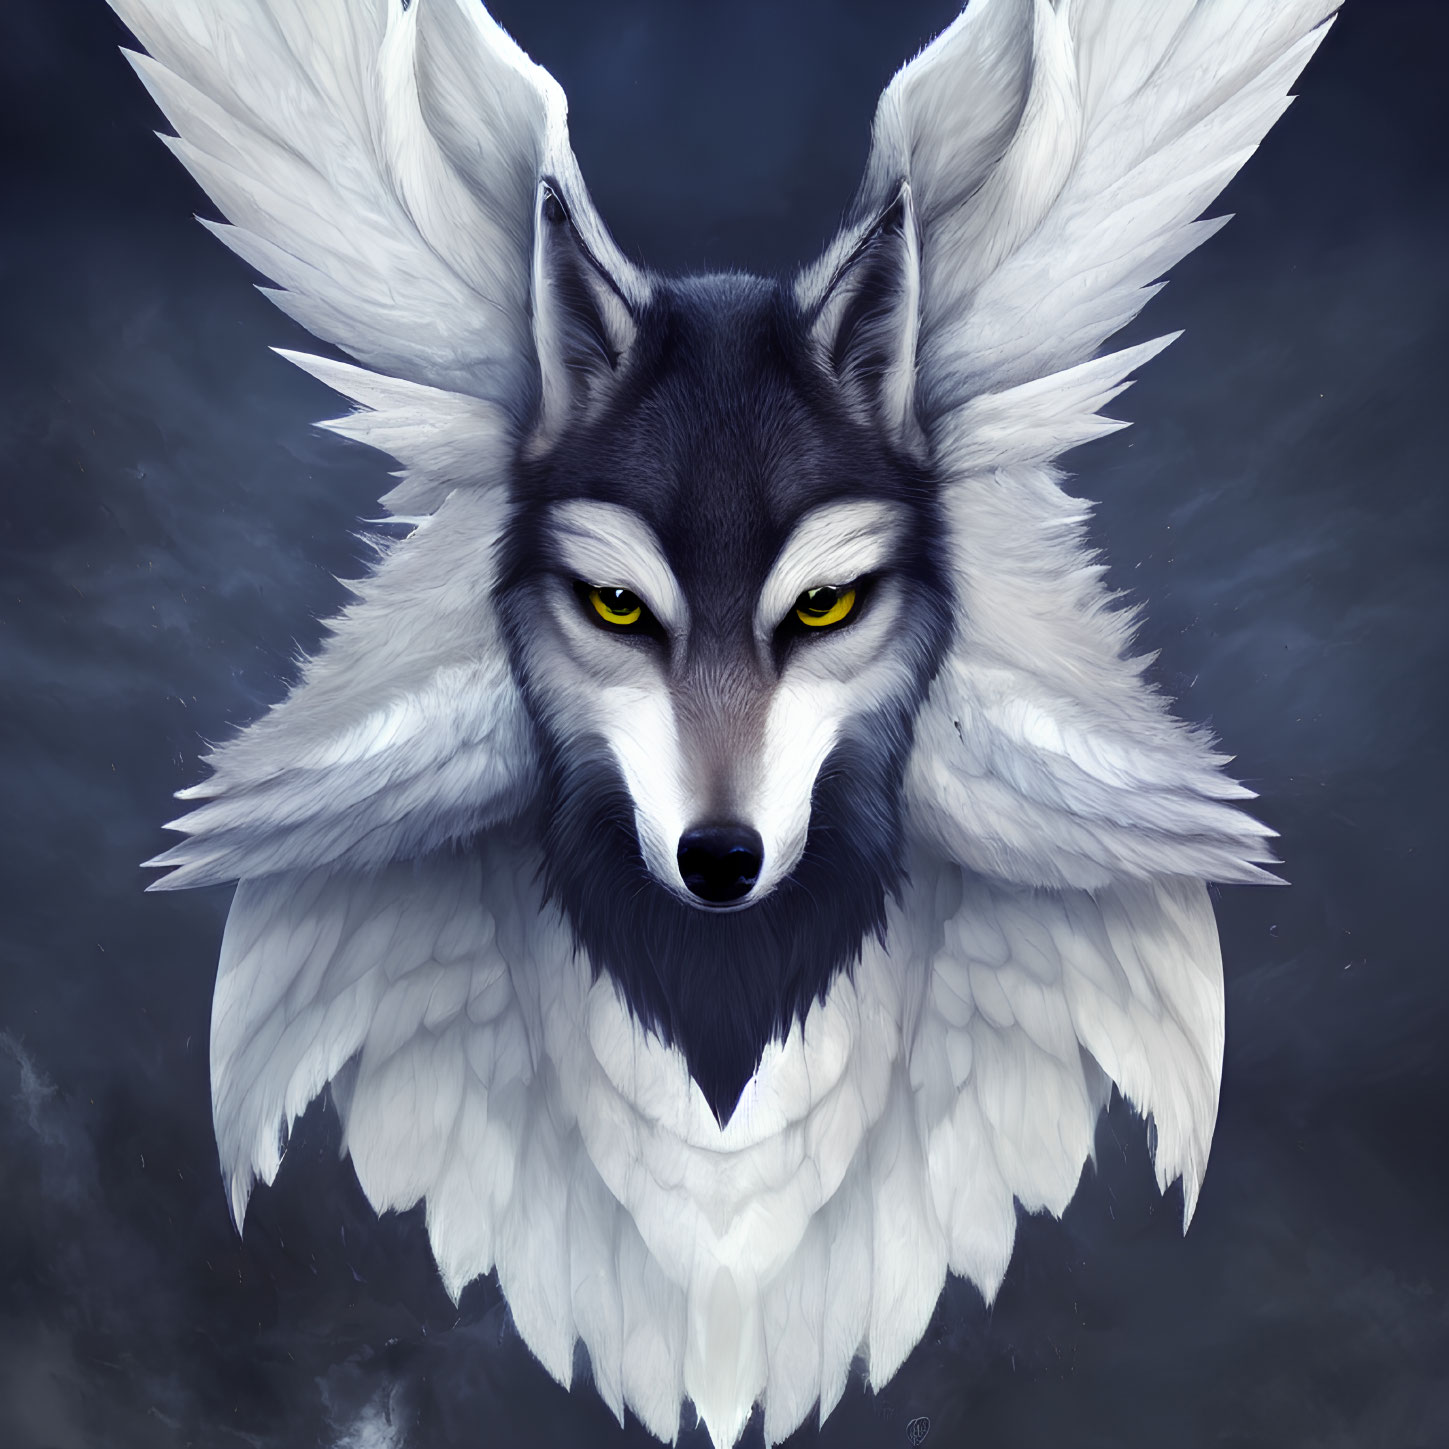 Majestic winged wolf with yellow eyes in dark cloudy setting